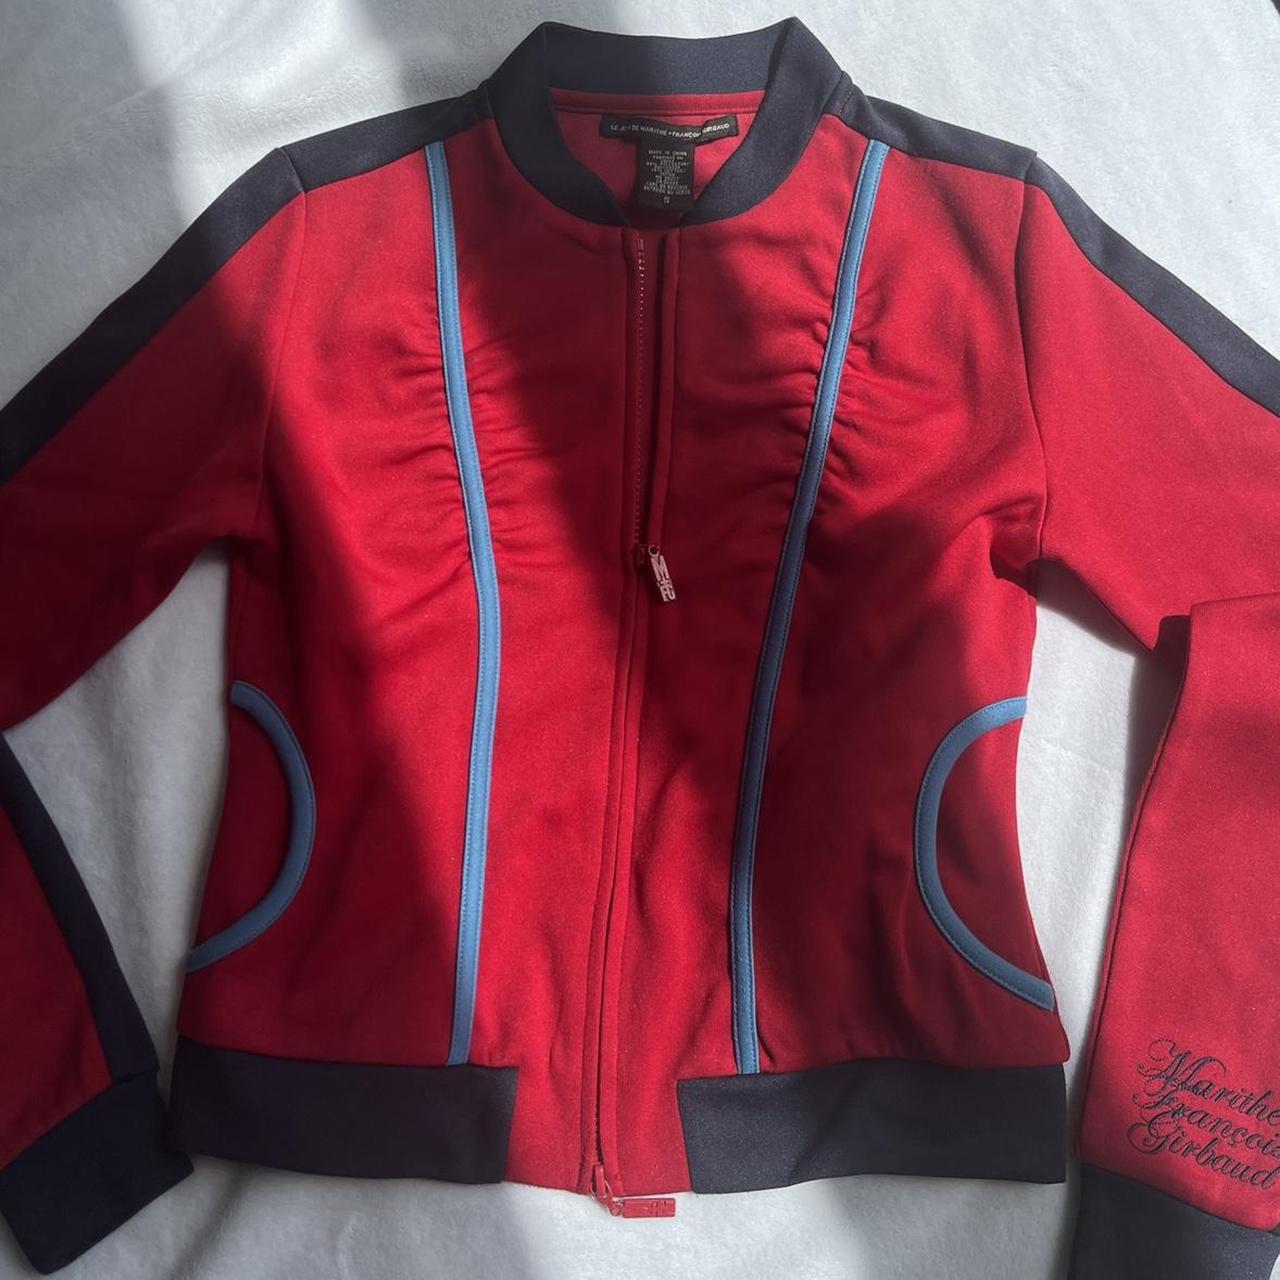 Marithe Francois Girbaud zip up super cute and... - Depop